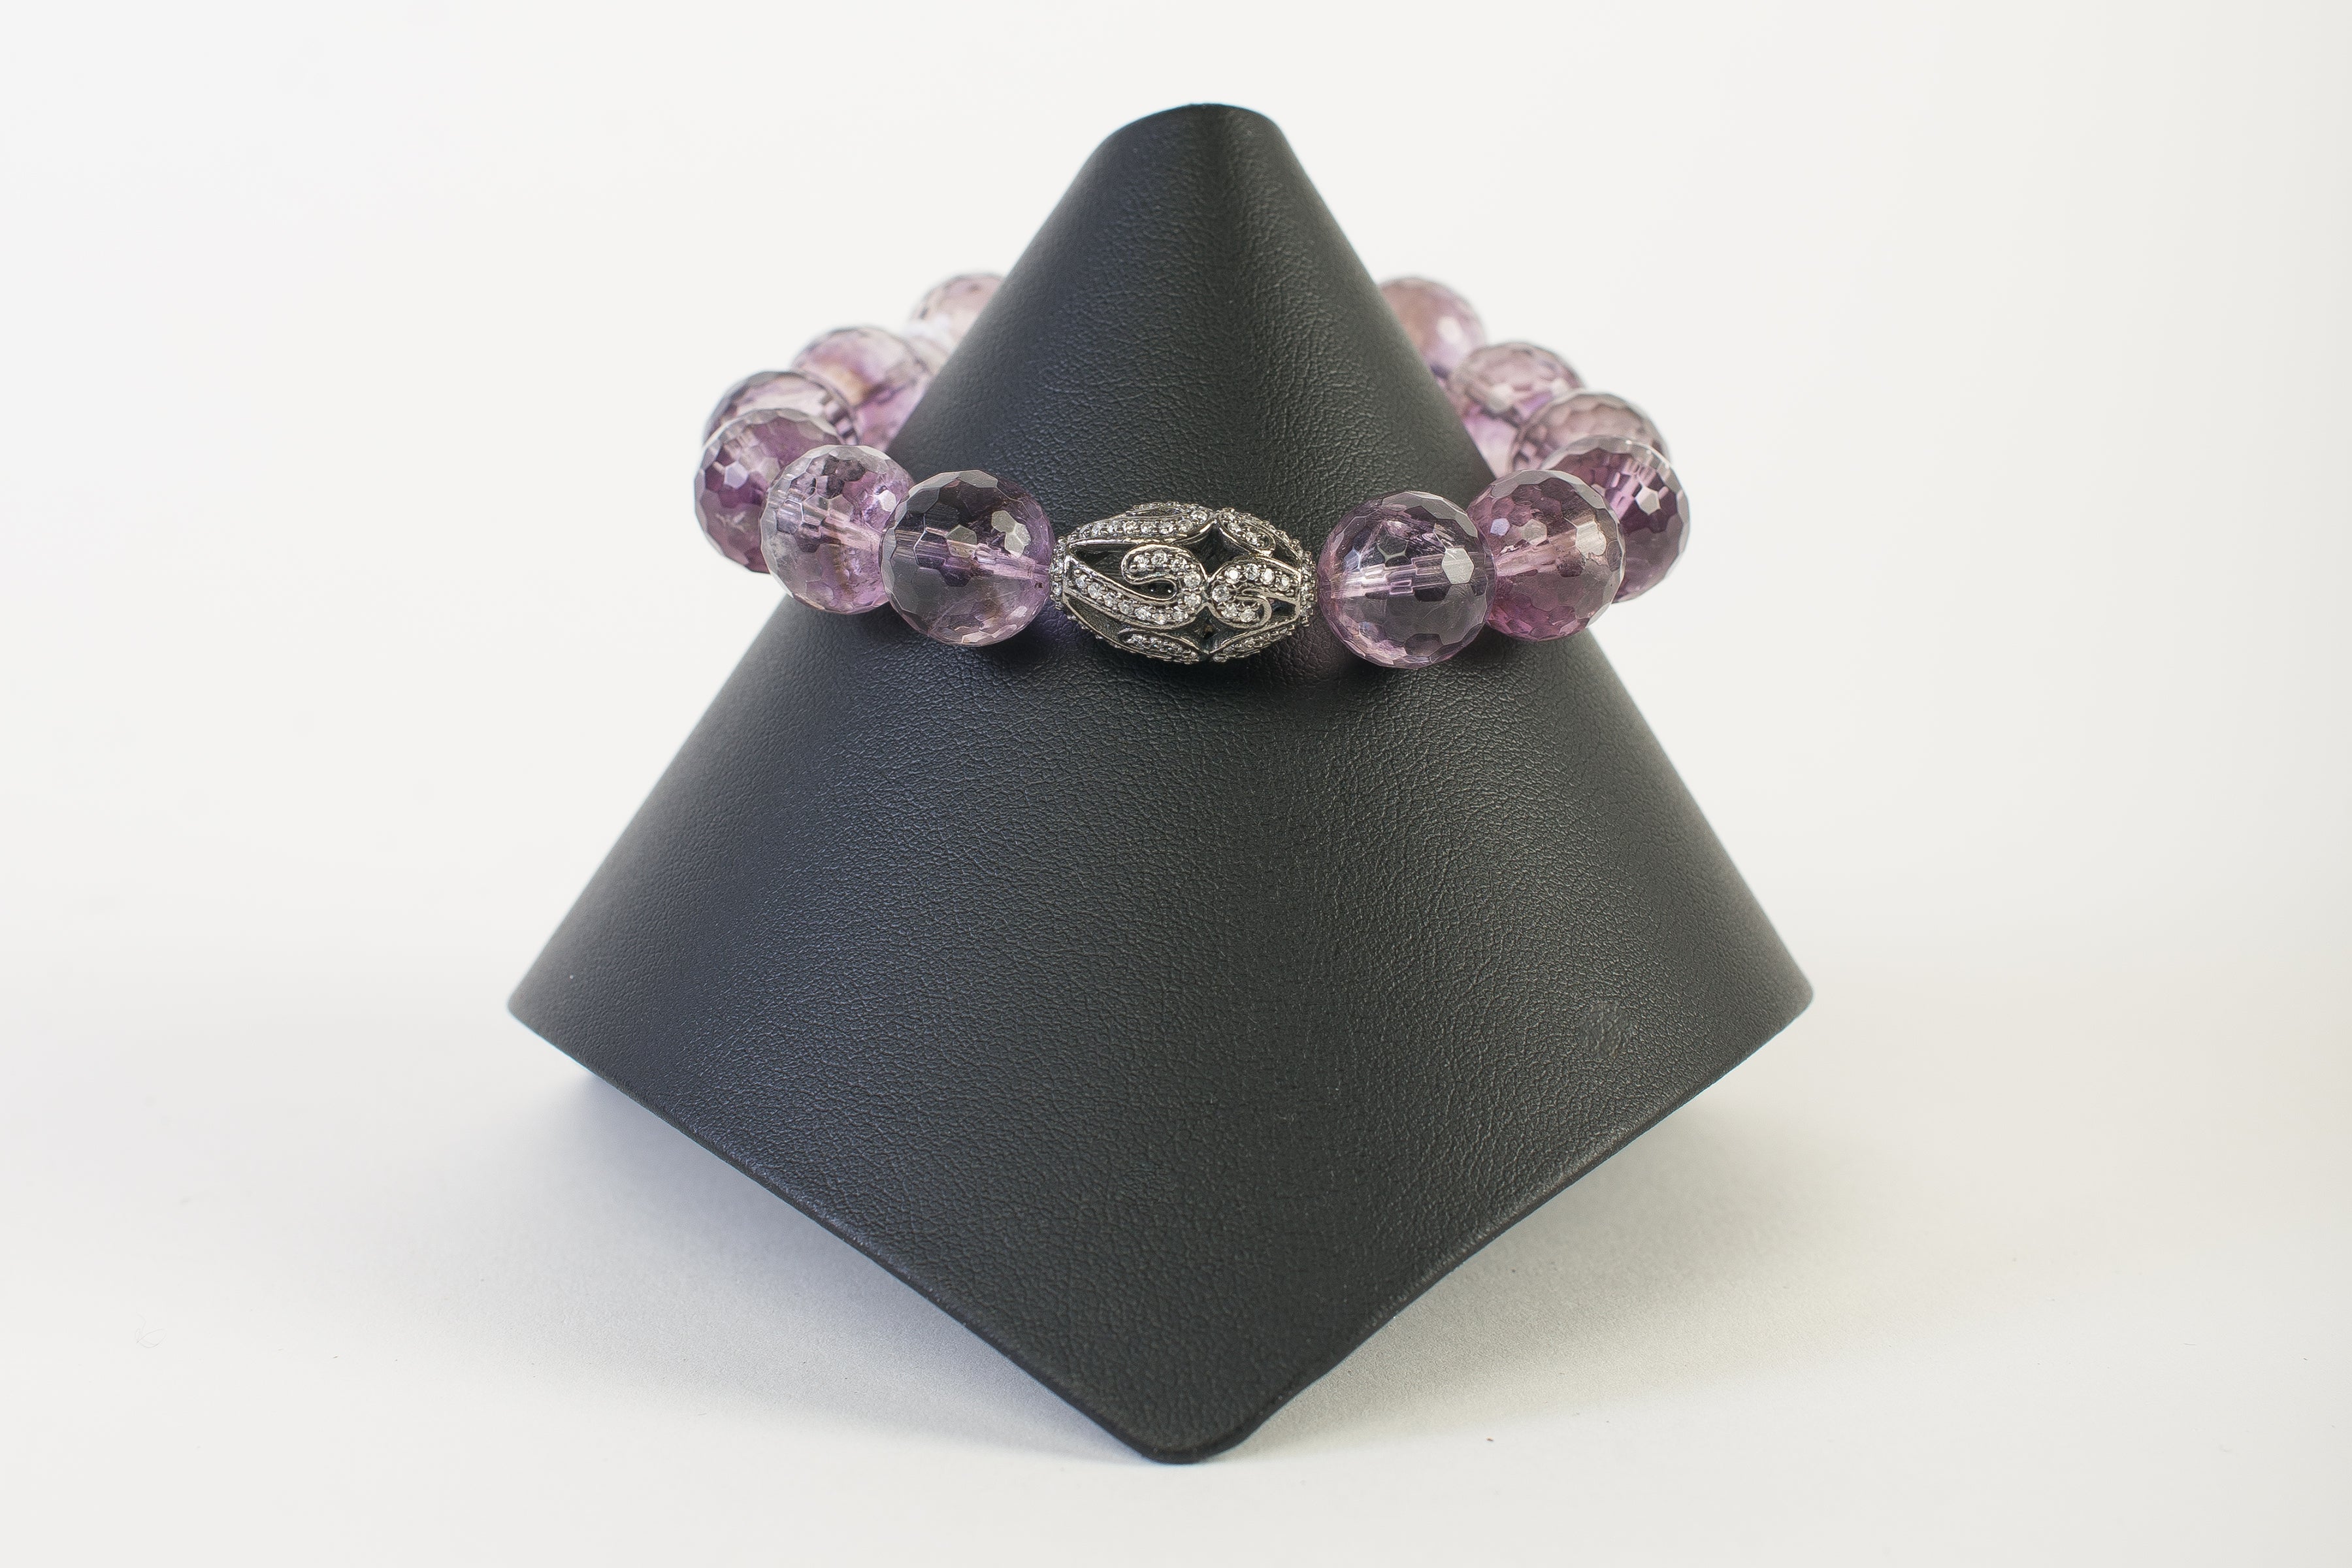 Faceted Amethyst with White Topaz Bead